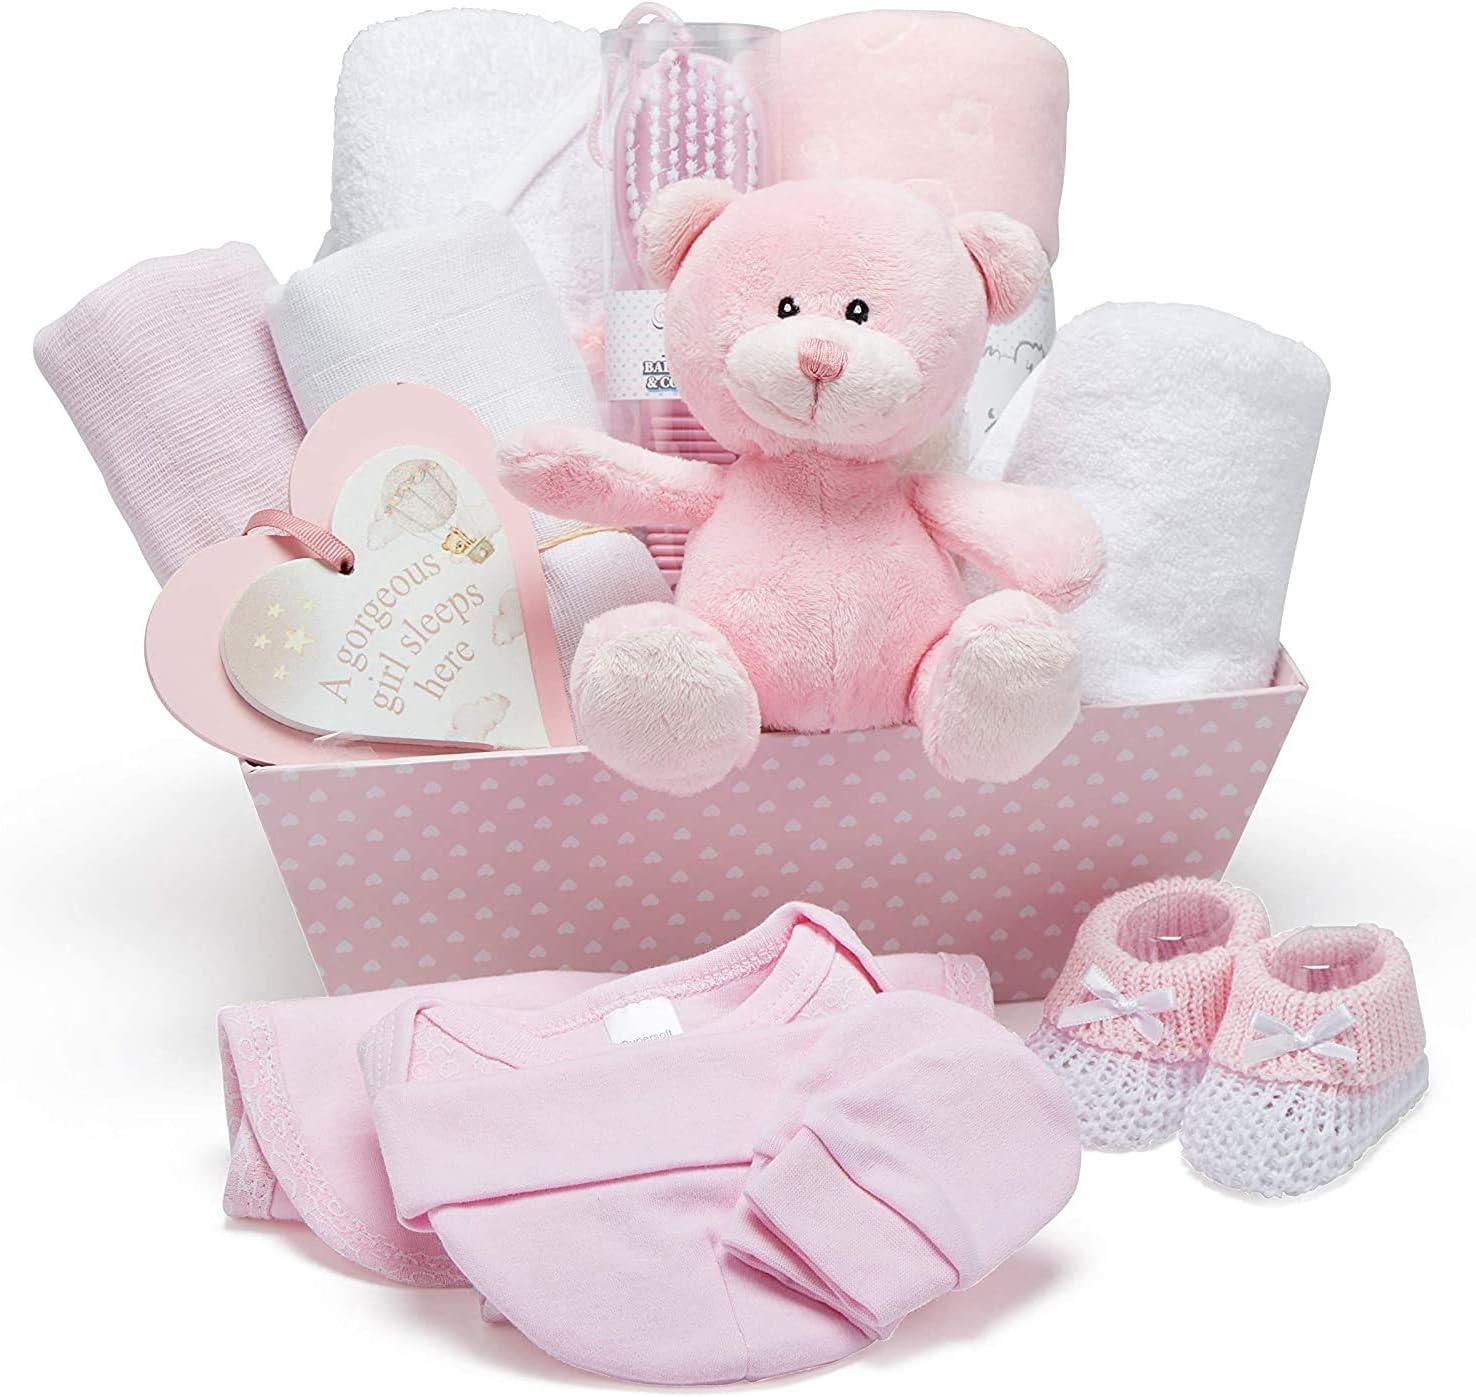 LOTS OF BABY GIRL GIFTS BASKET, USA Delivery